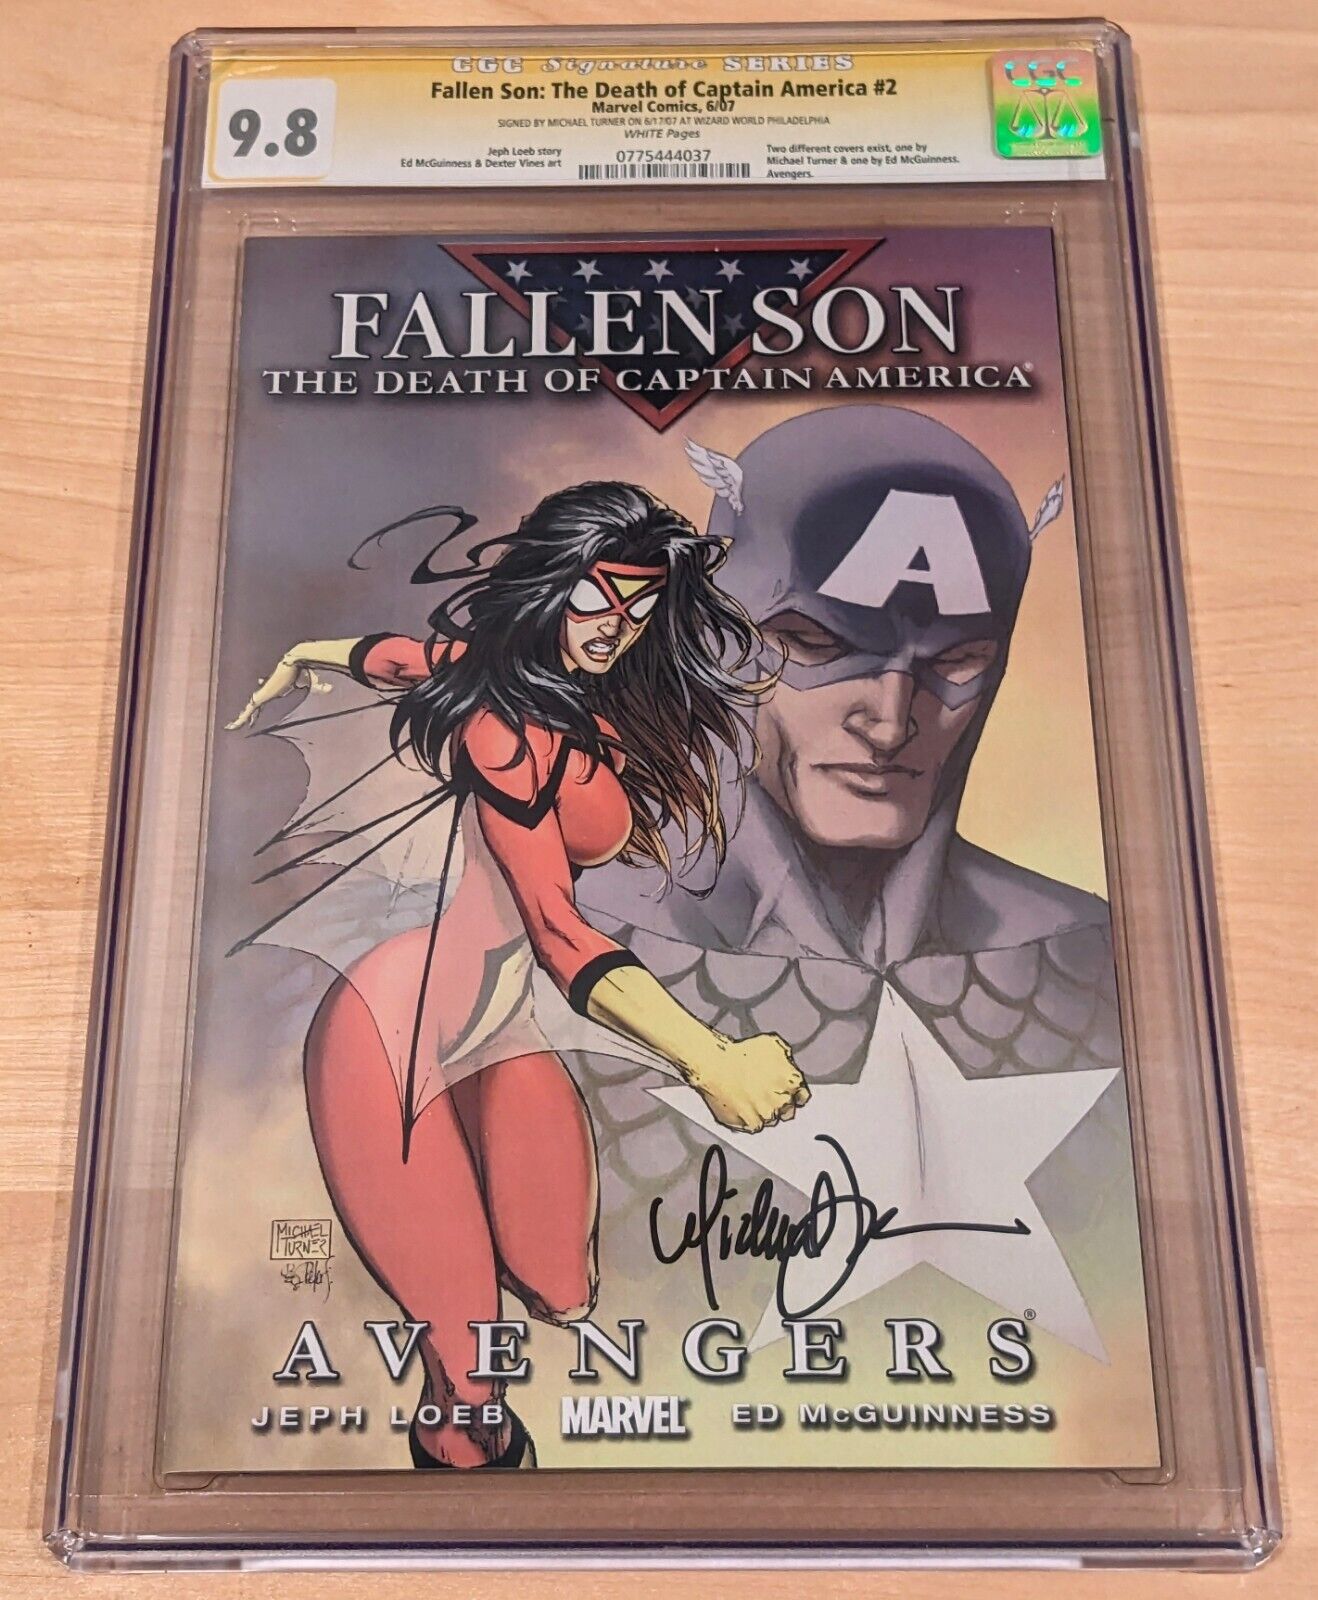 FALLEN SON DEATH OF CAPTAIN AMERICA #2 CGC 9.8 SS MICHAEL TURNER SIGNED VARIANT